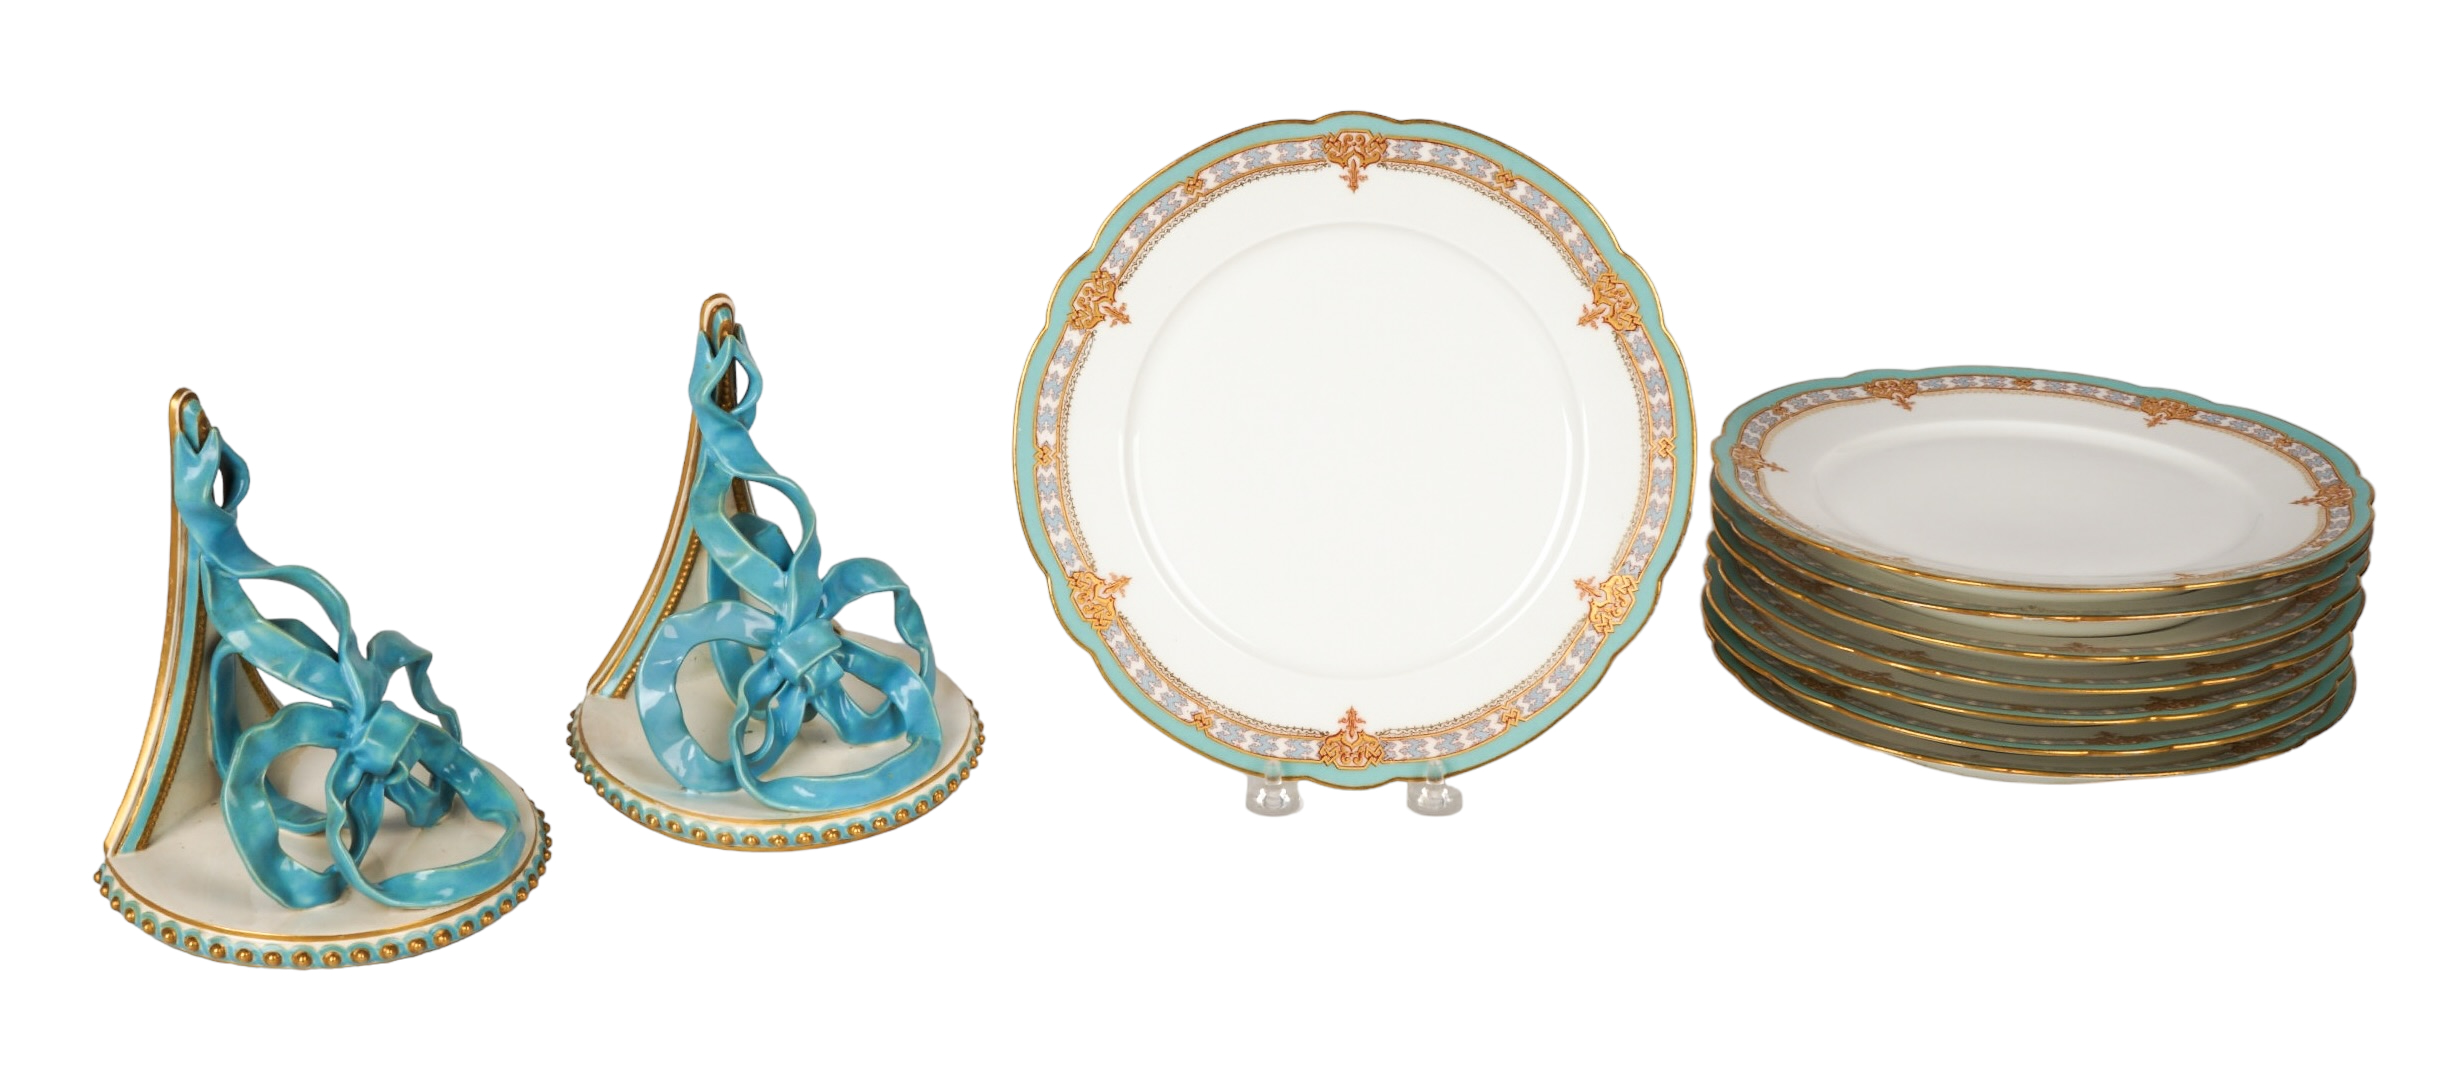 French porcelain plates and wall